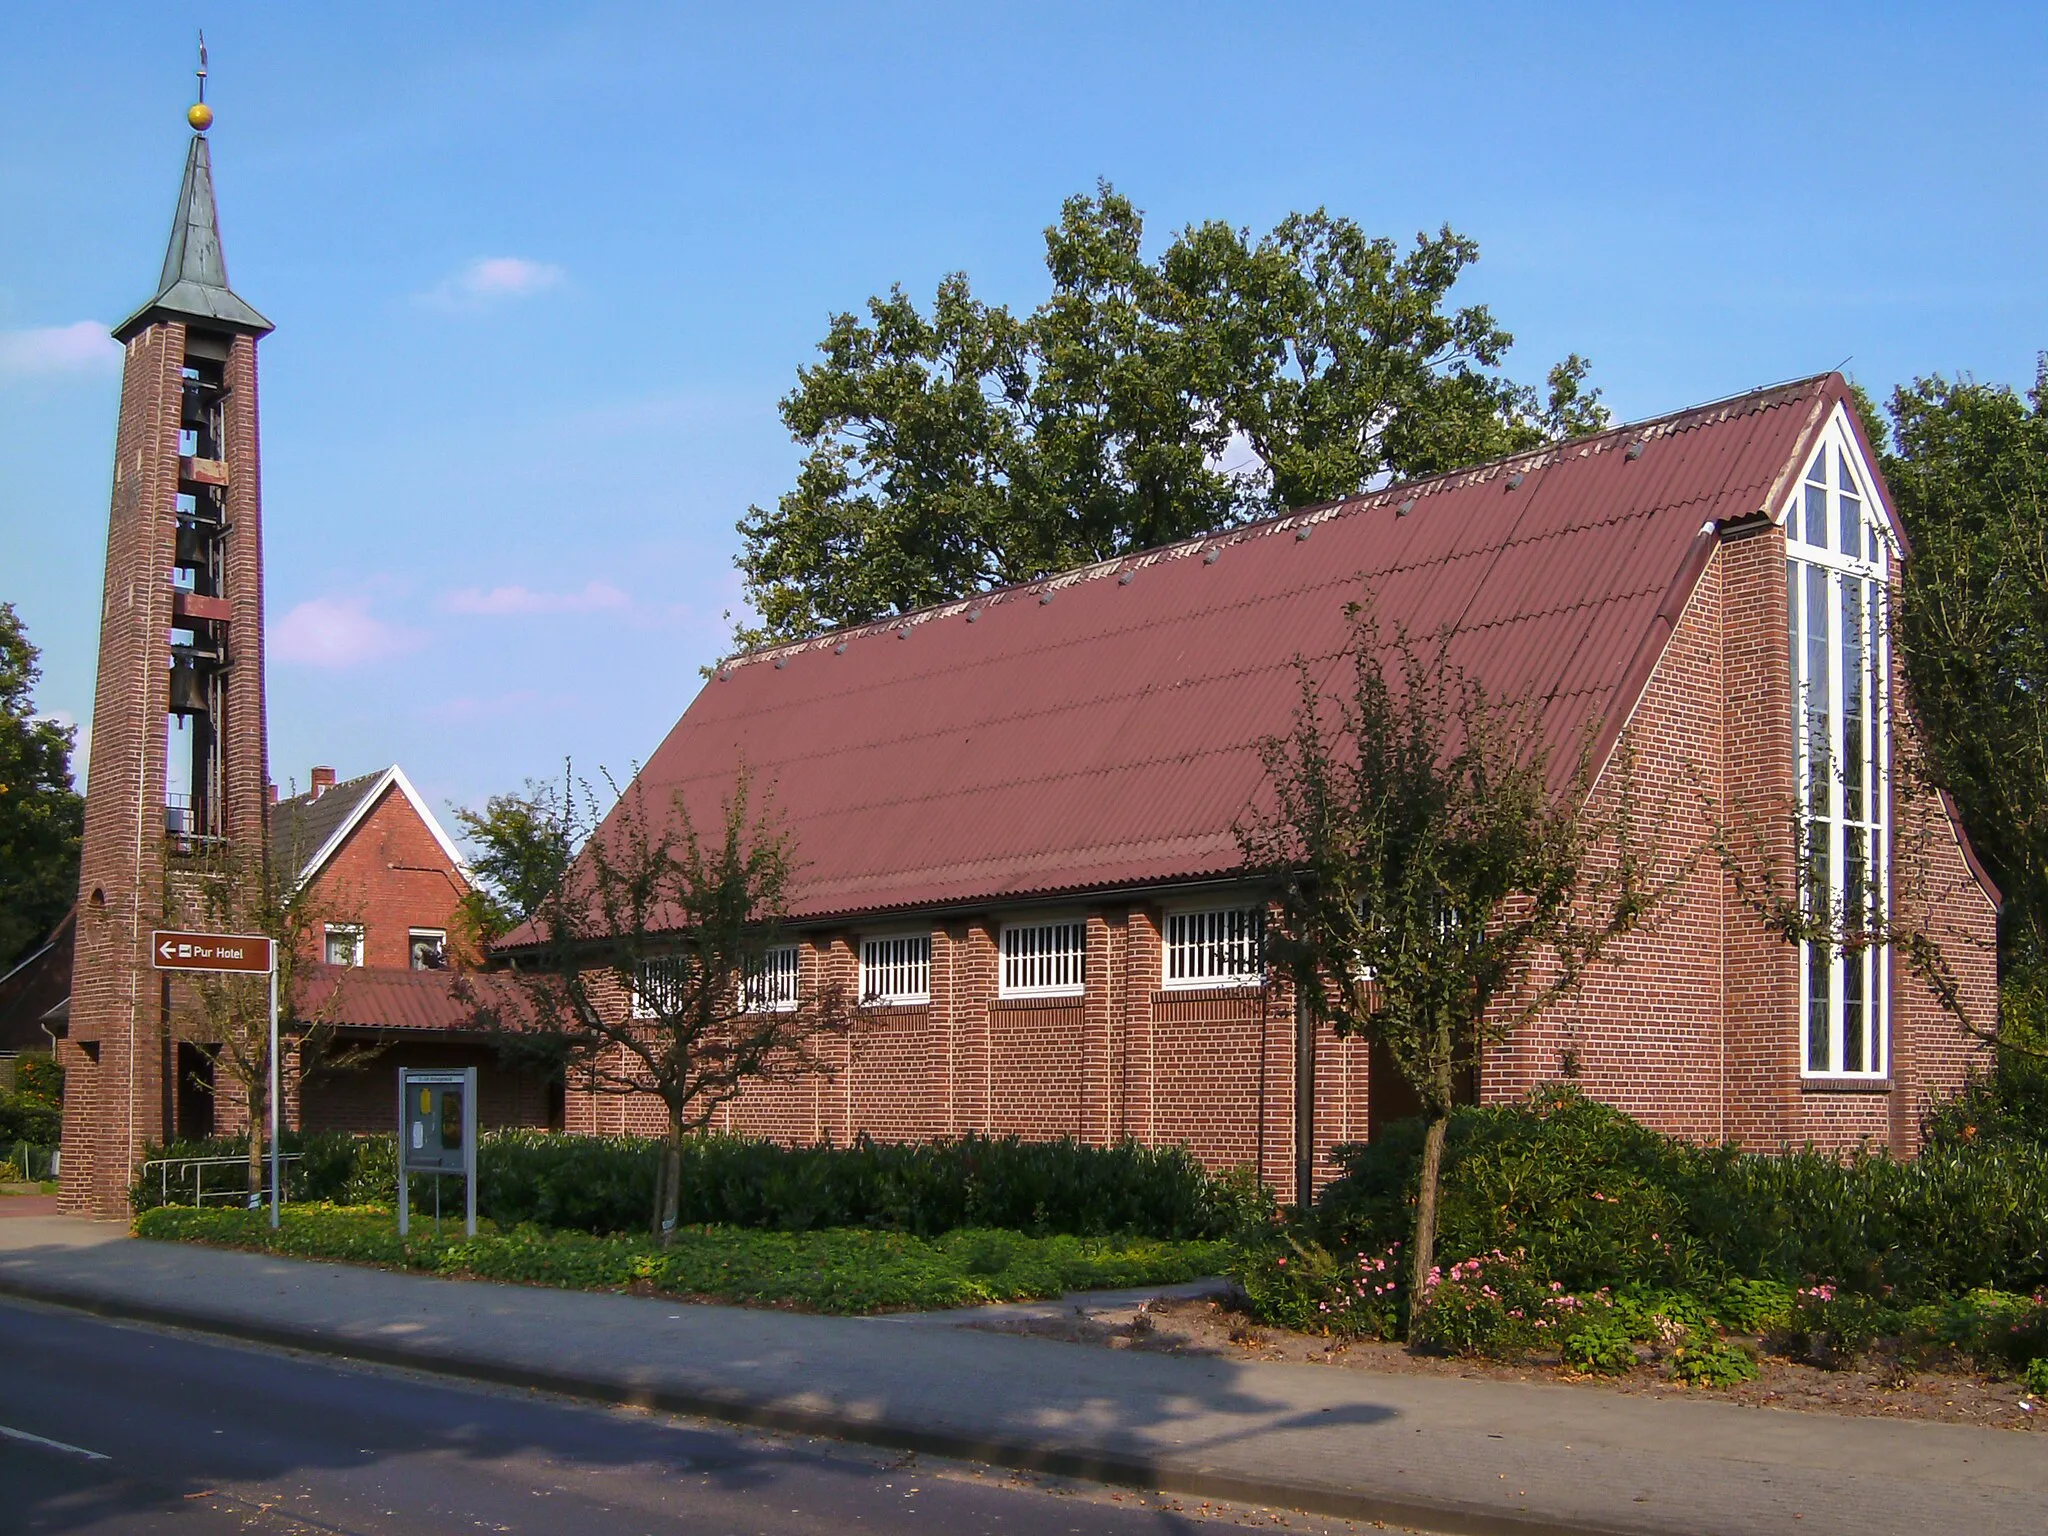 Photo showing: The Evangelical Lutheran Peace Church in Emlichheim, Lower Saxony, Germany, is owned and used by a congregation within Evangelical Lutheran State Church of Hanover.